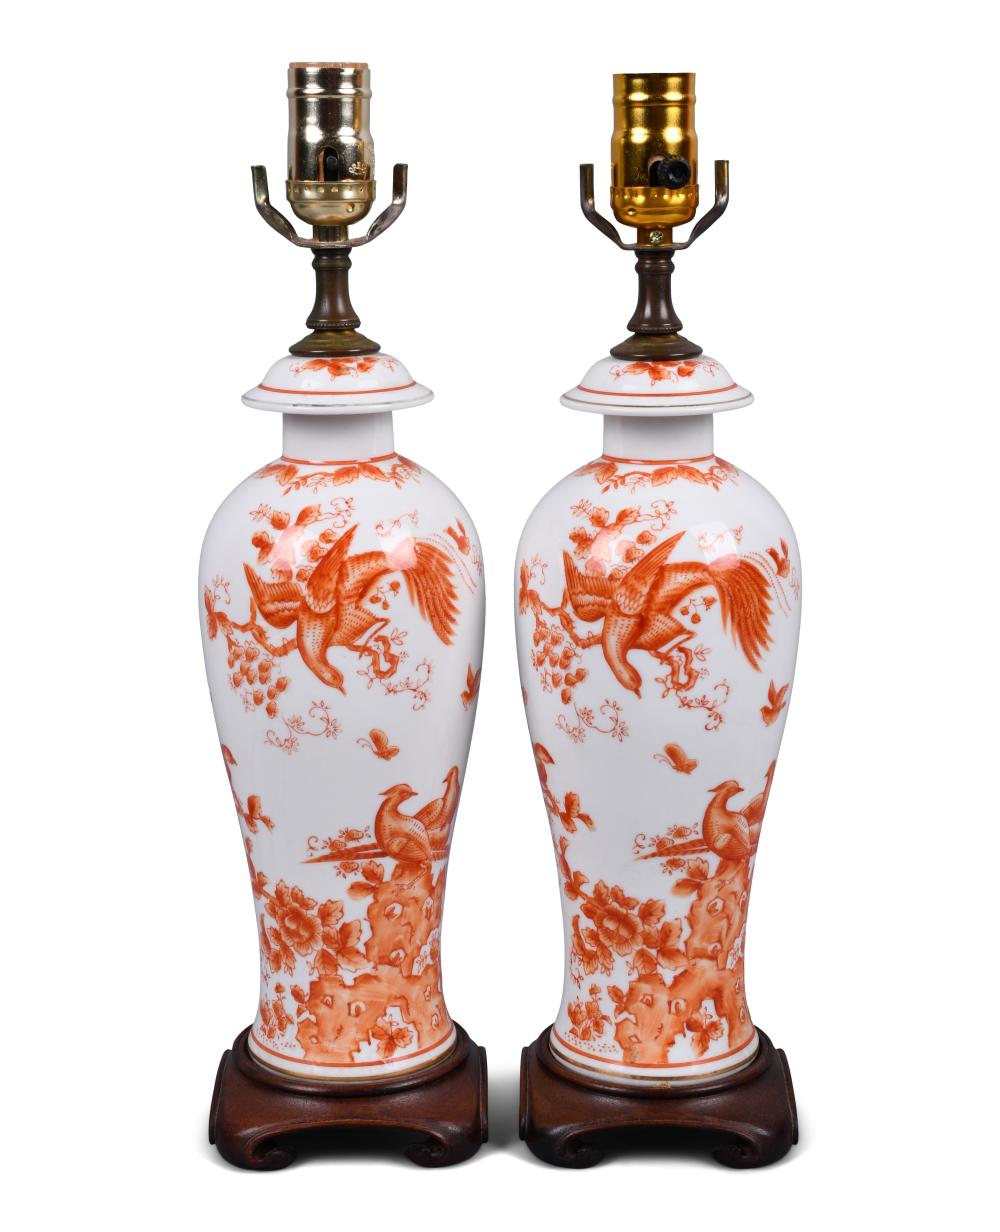 PAIR OF IRON RED DECORATED LAMPS  309f64